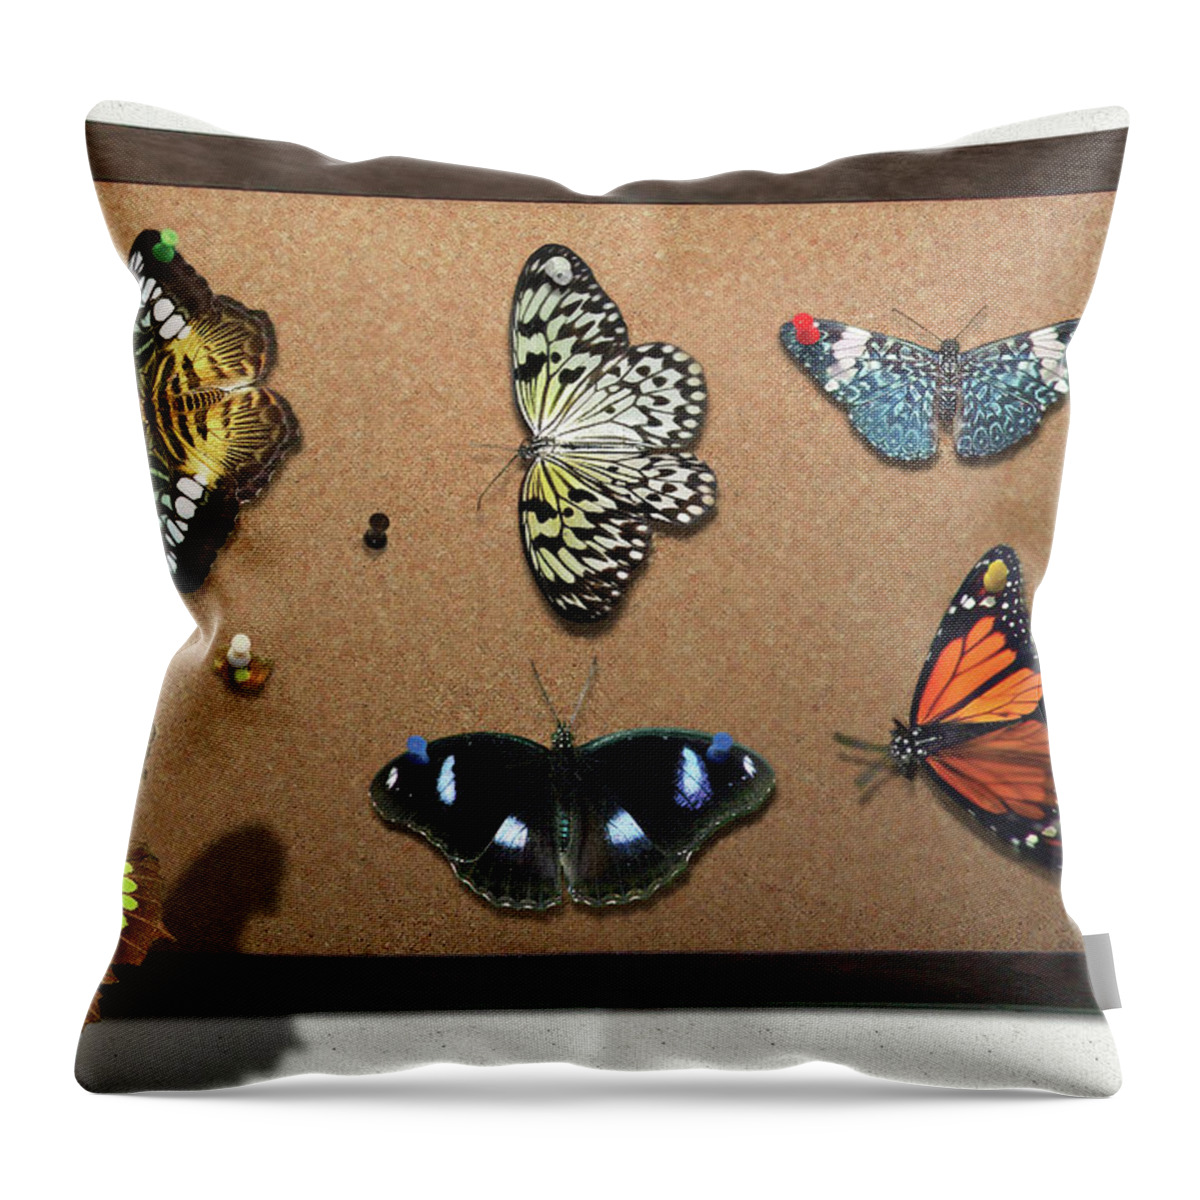 Lepidopterist Throw Pillow featuring the photograph Collector - Lepidopterist - My Butterfly Collection by Mike Savad